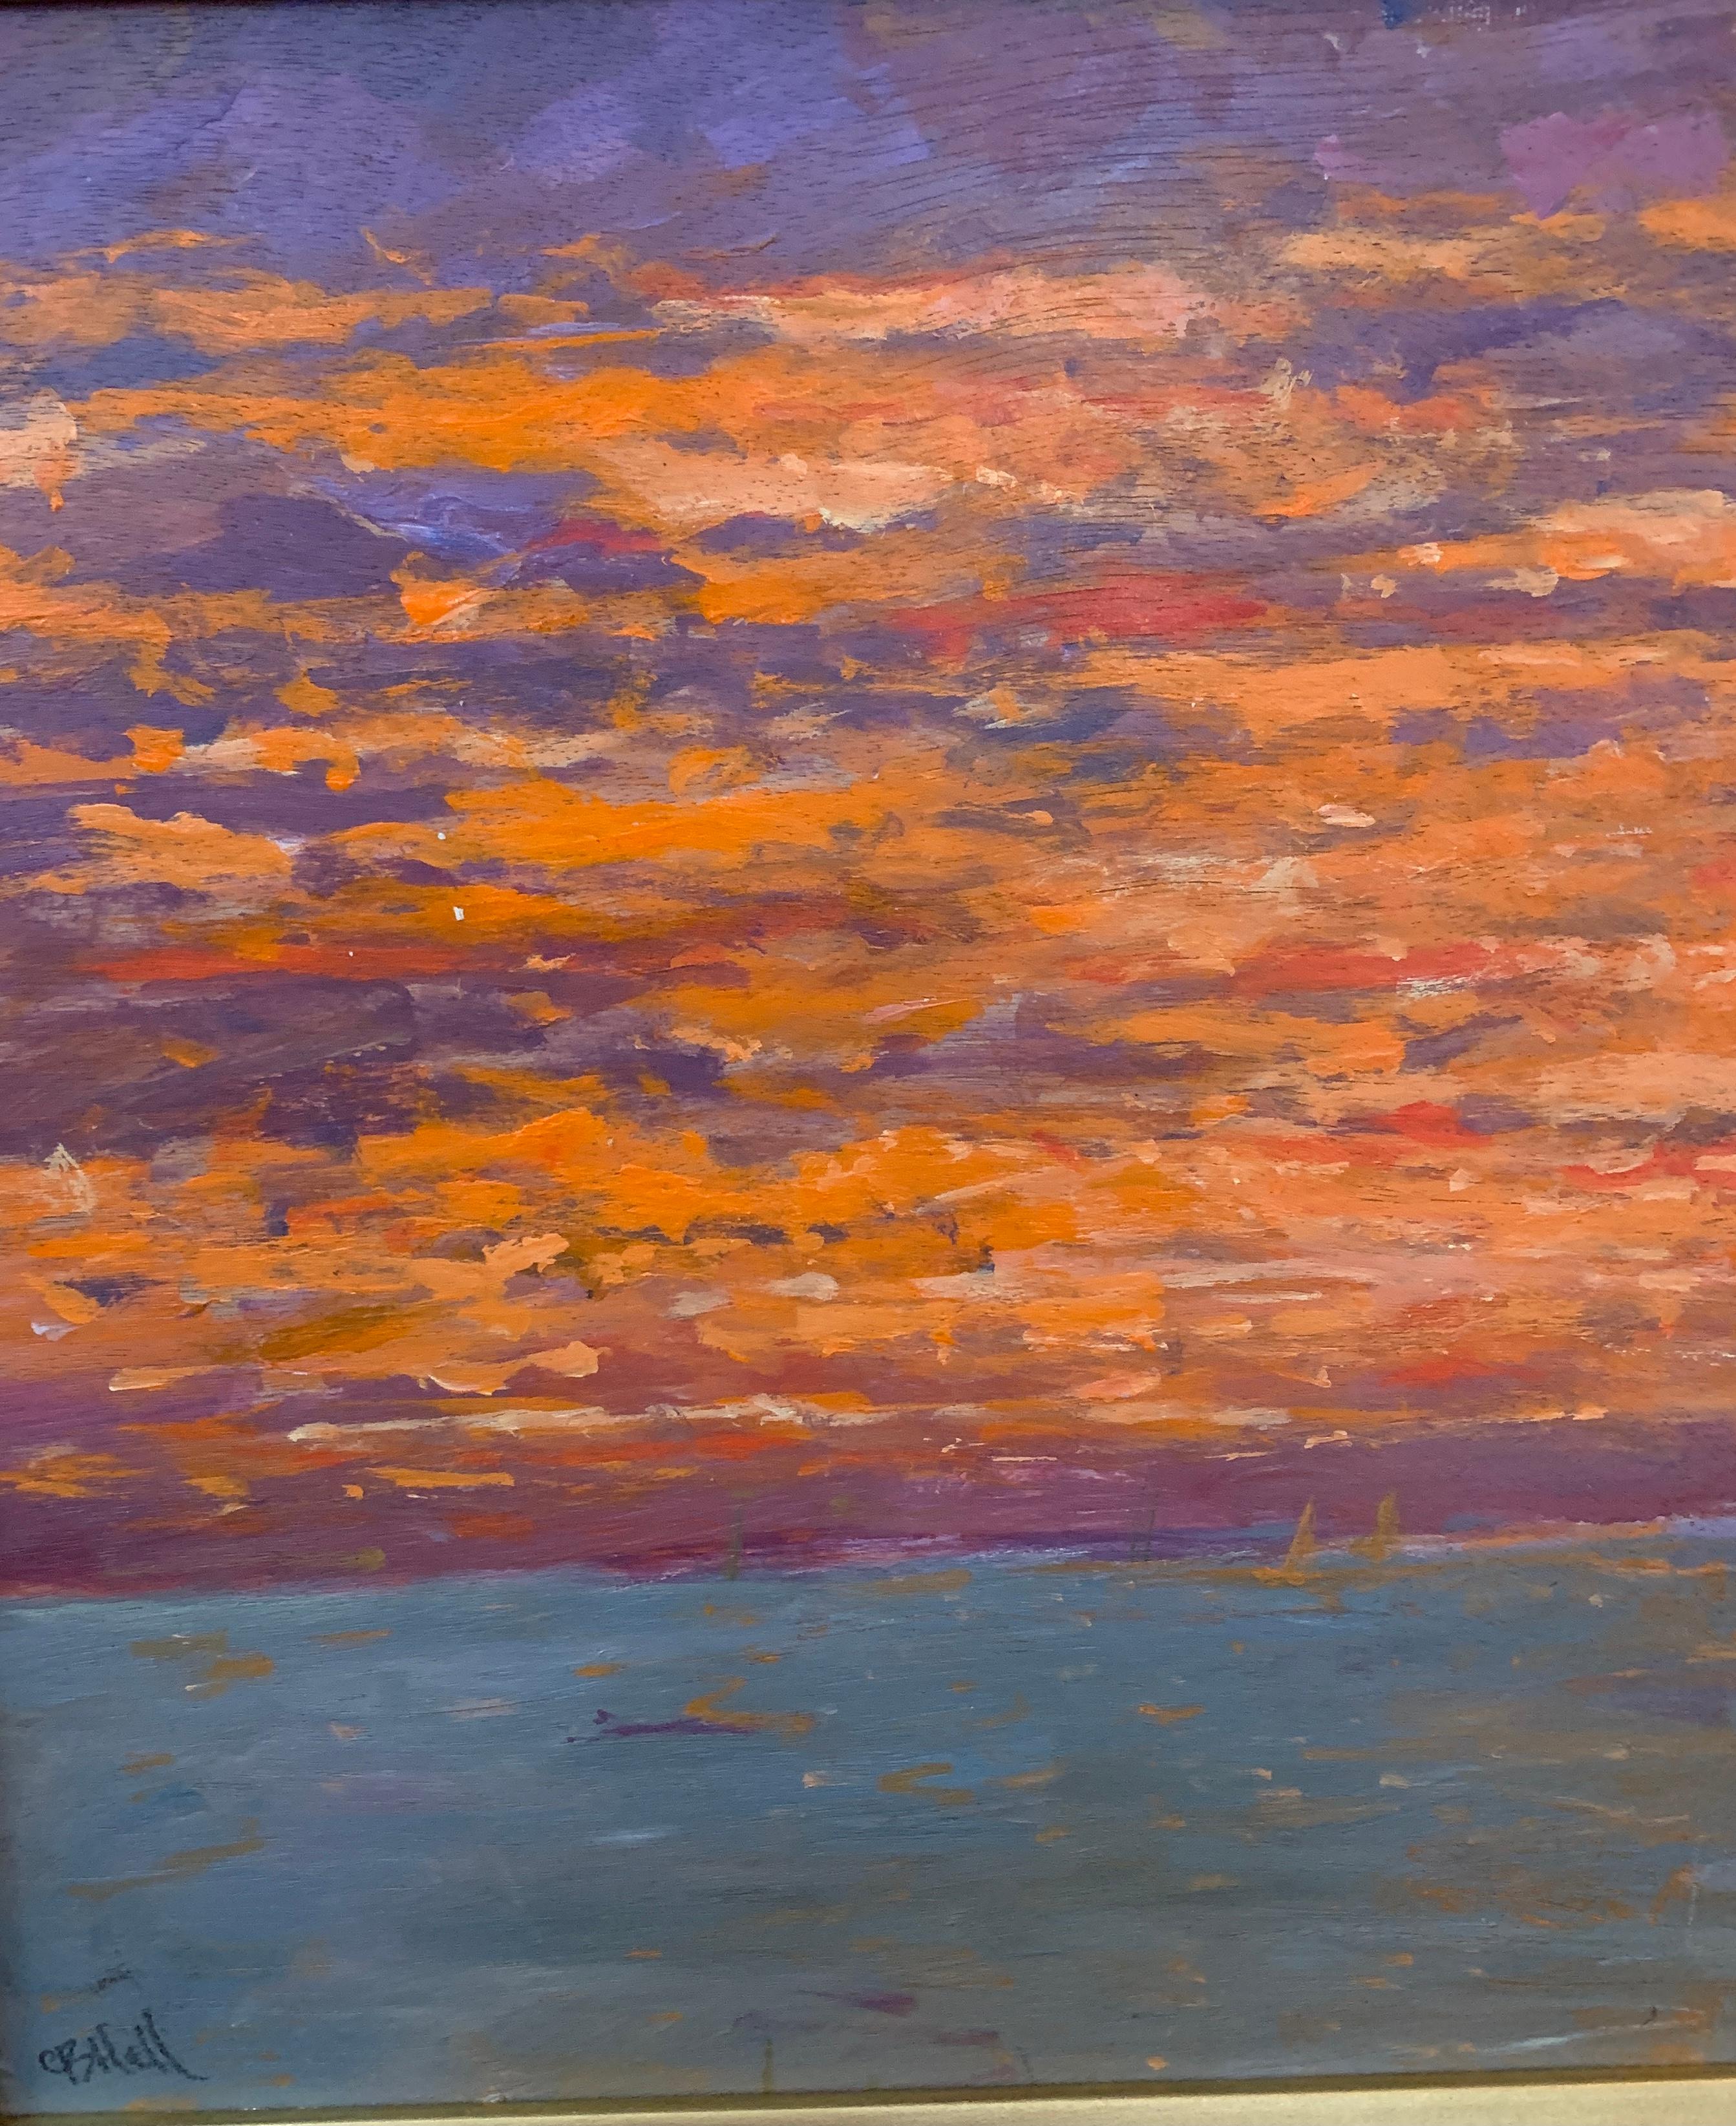 Summer 2019 Sunset in Nantucket with landscape near Madaket, America.

Whilst painted mostly in the UK and America Hall also painted throughout Europe and on occasion would paint Plein Air in France, Austria, and Switzerland. This piece was painted